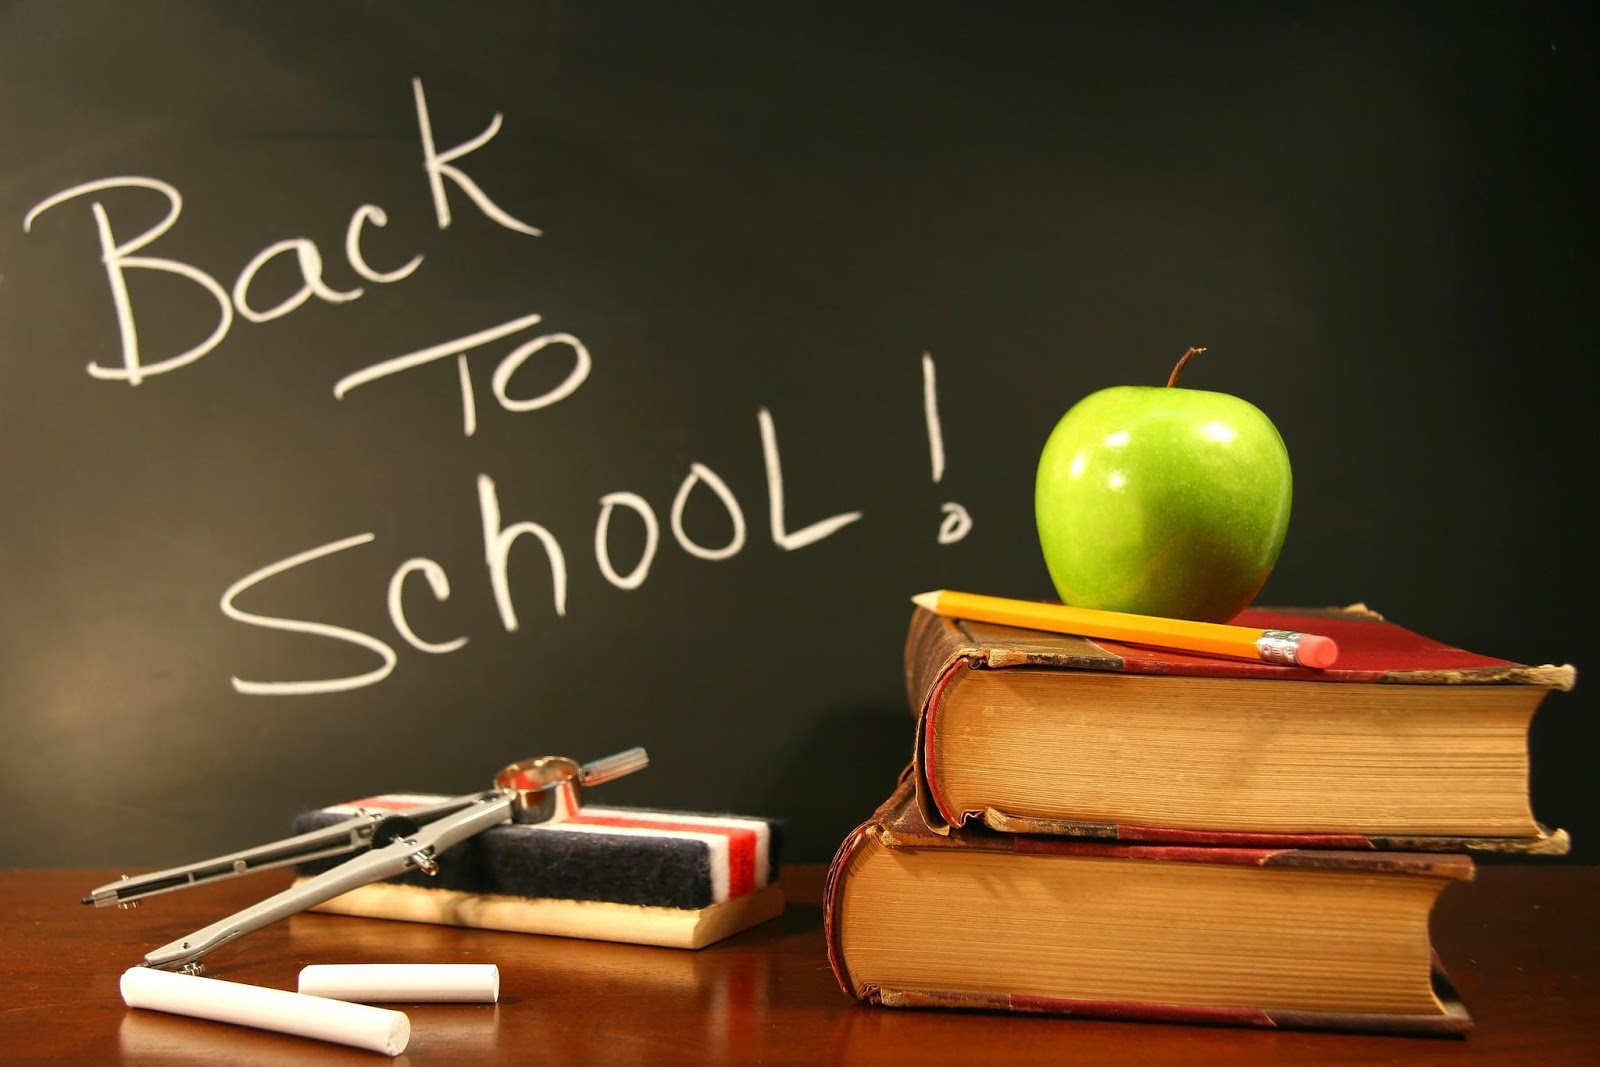 School HD Wllpaper,Images Free Pictures Download